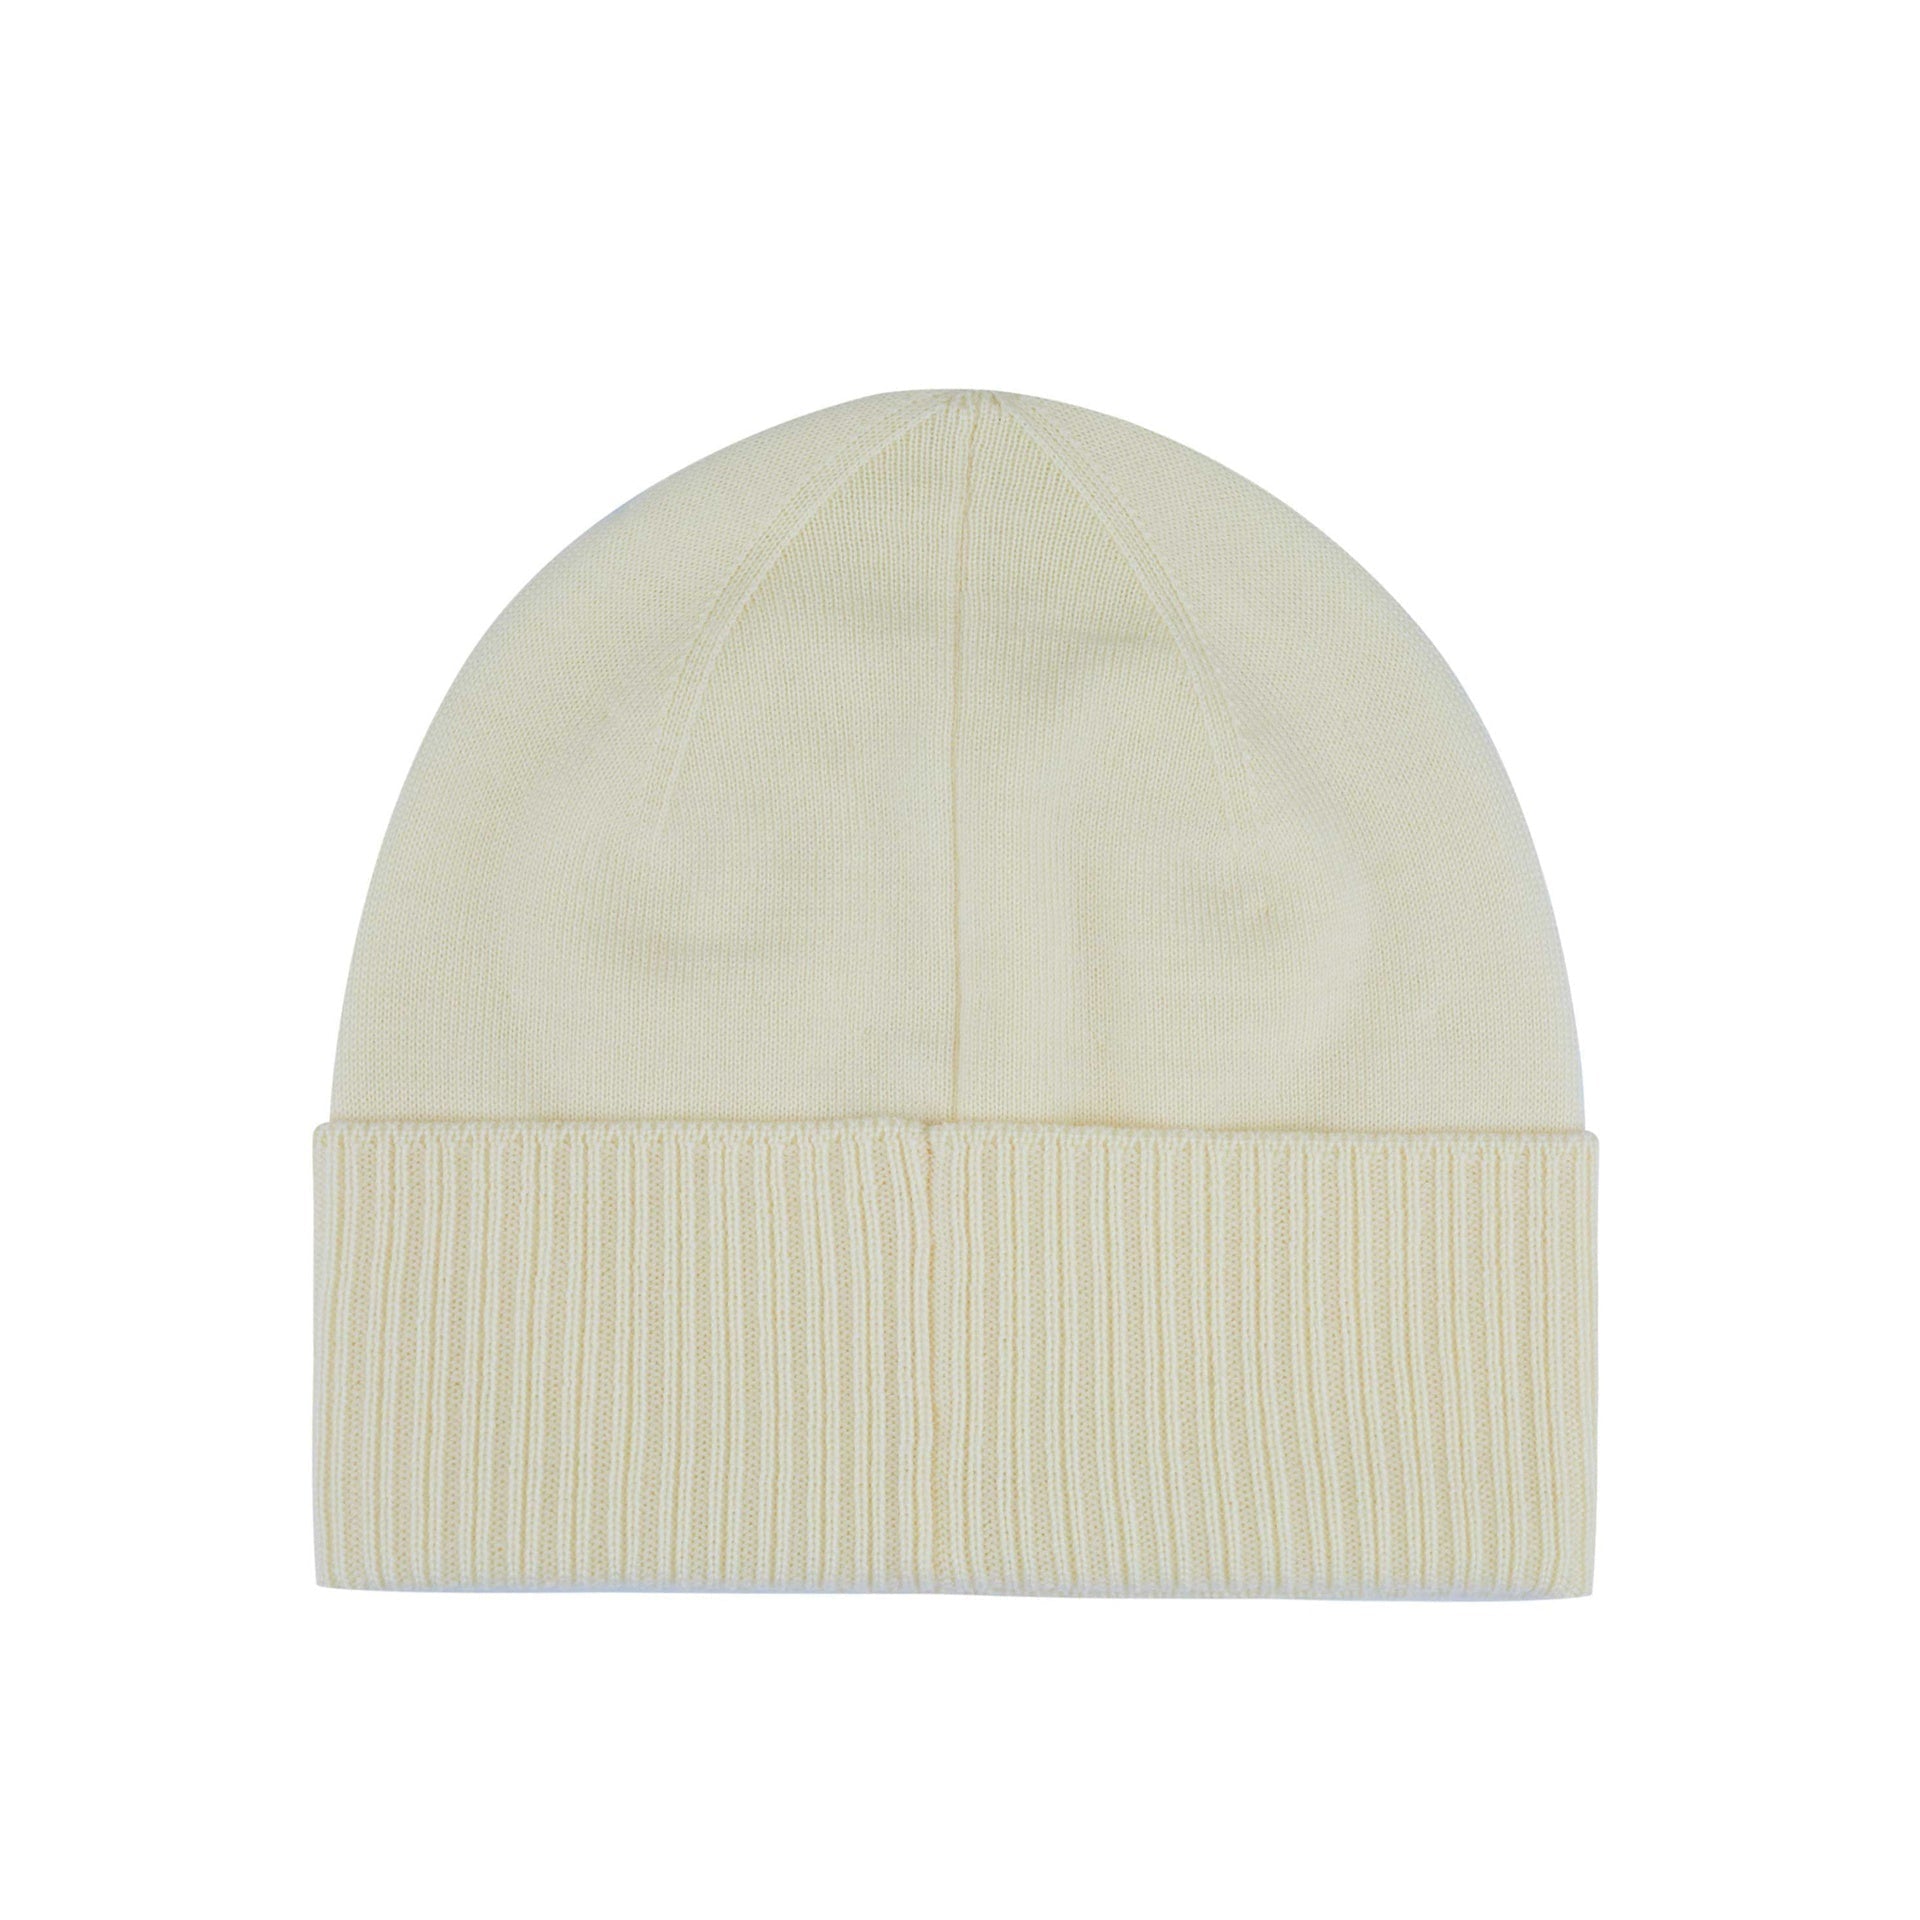 GIVENCHY-OUTLET-SALE-Givenchy-Wool-Logo-Hat-Hute-CREAM-UNI-ARCHIVE-COLLECTION-2.jpg